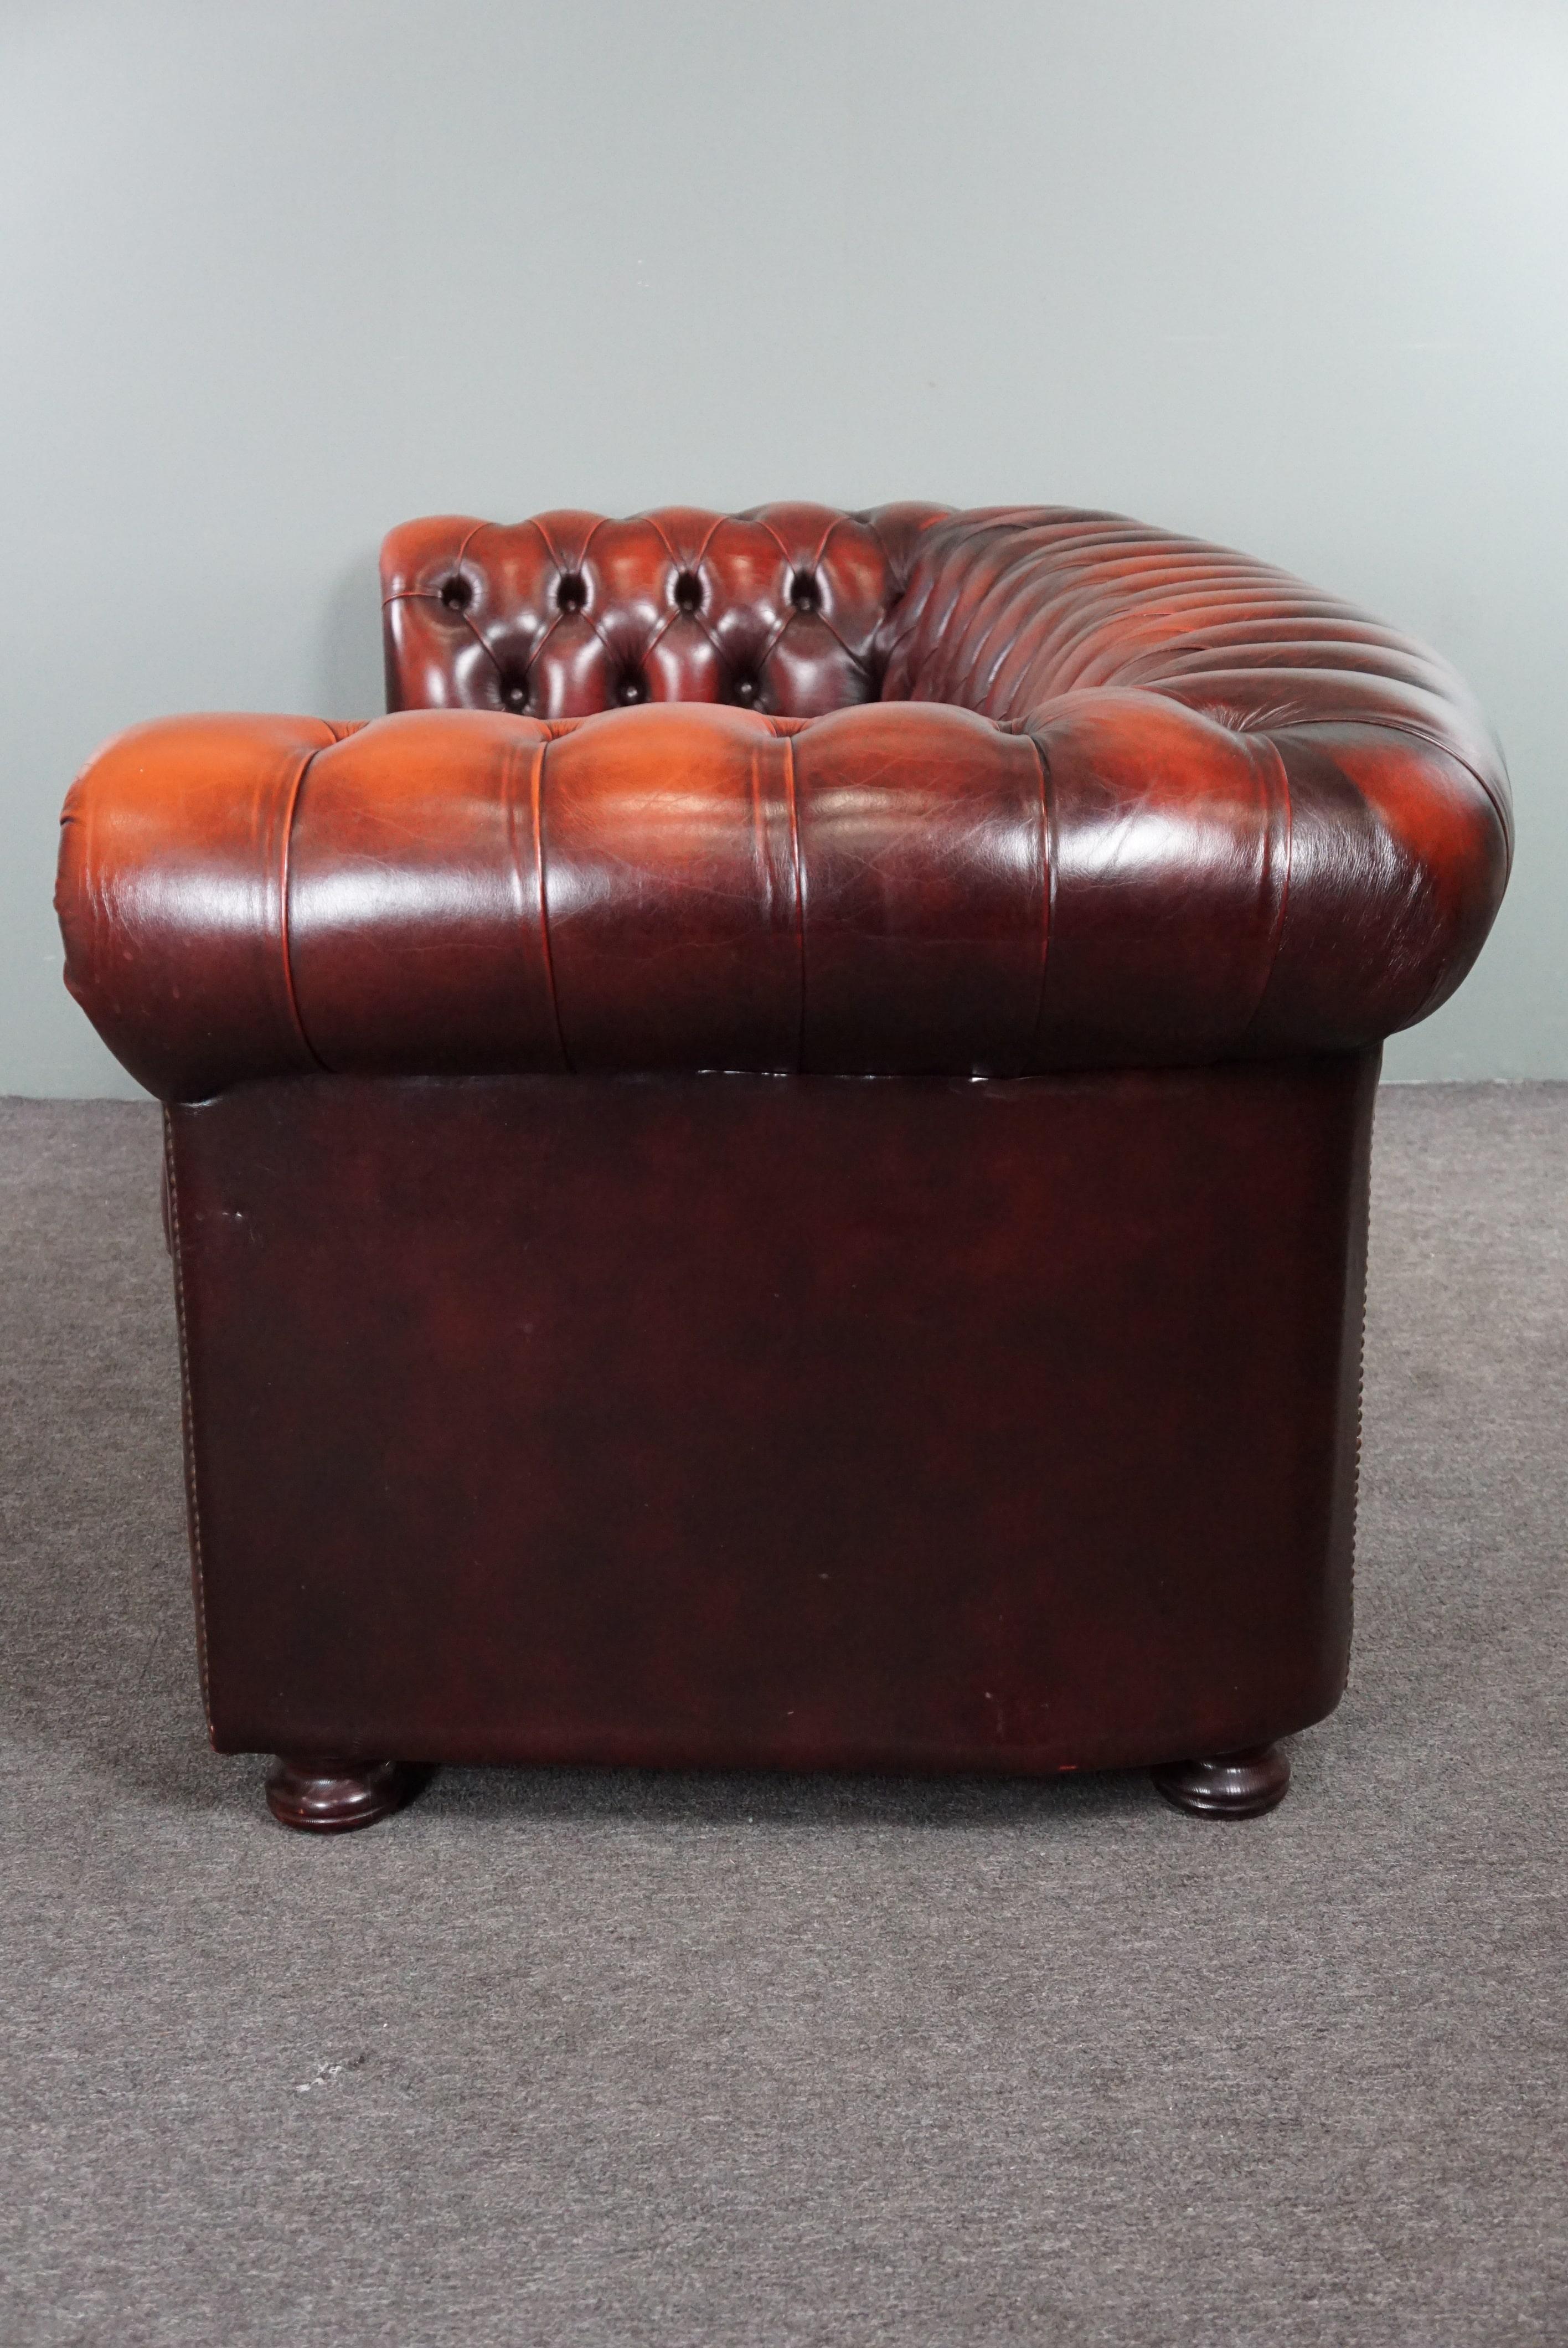 Hand-Crafted Beautiful colored red spacious cow leather Chesterfield sofa, 2.5 seater For Sale